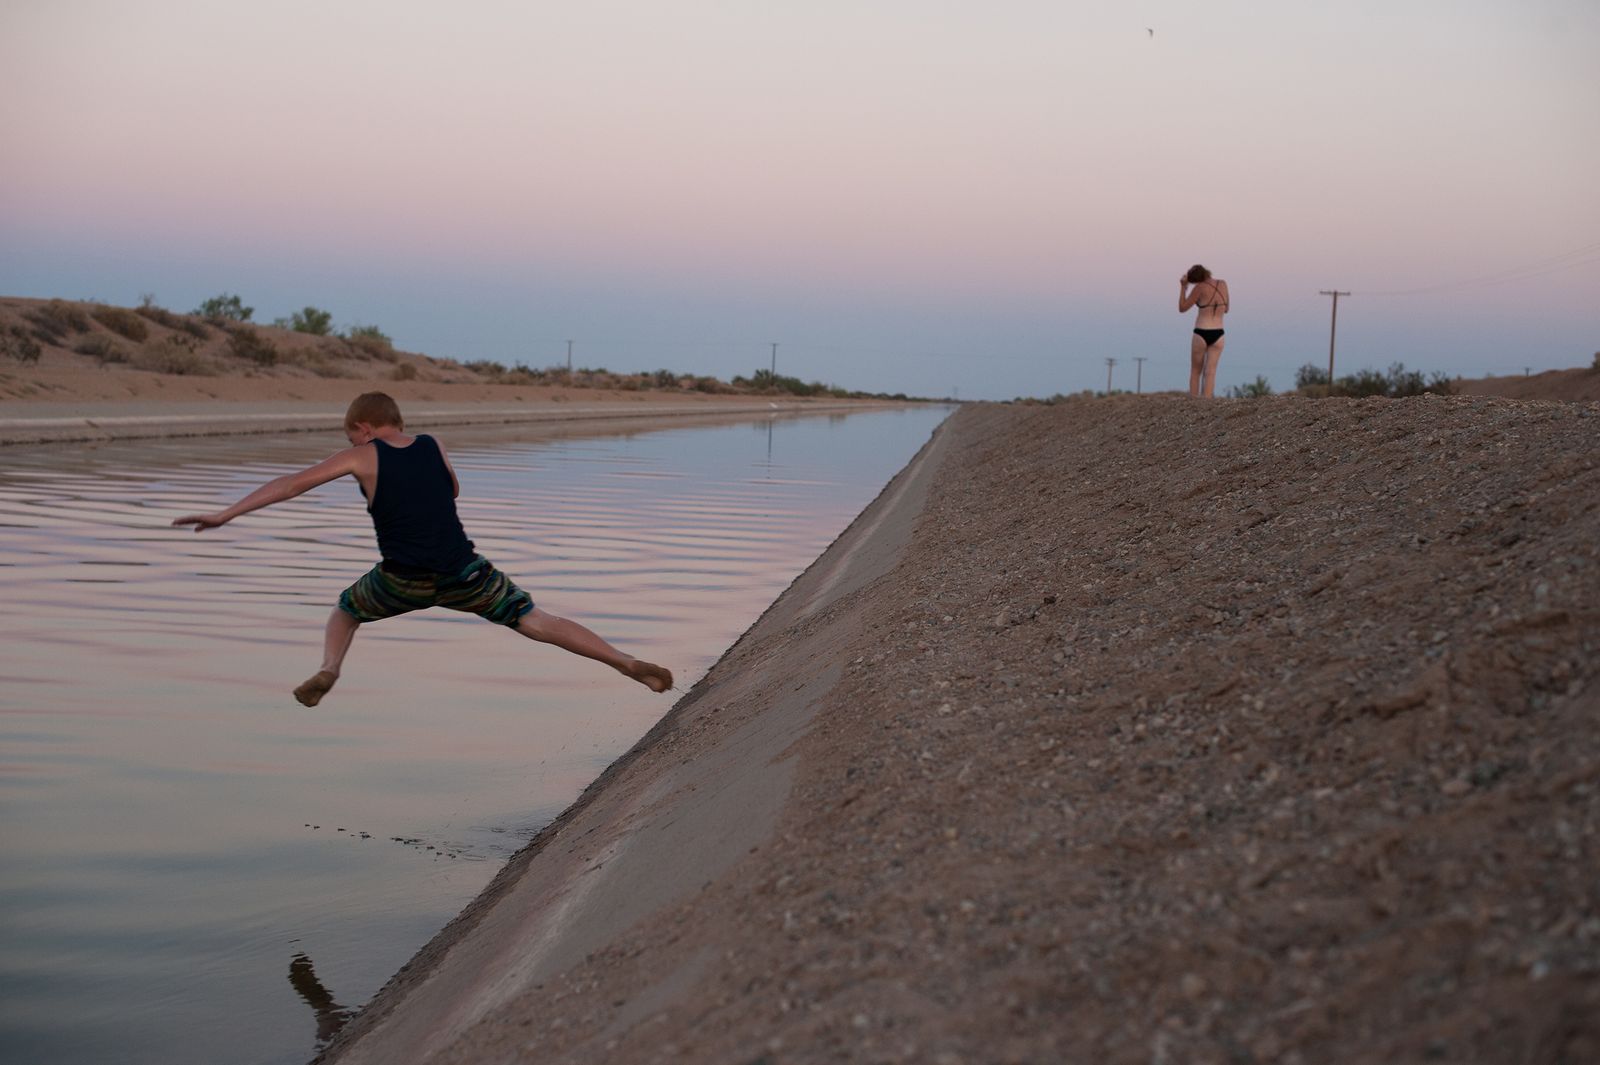 © Jason Houge - Families risk arrest and drowning in swift currents to swim in the cool waters of a nearby canal; Slab City, USA 2018